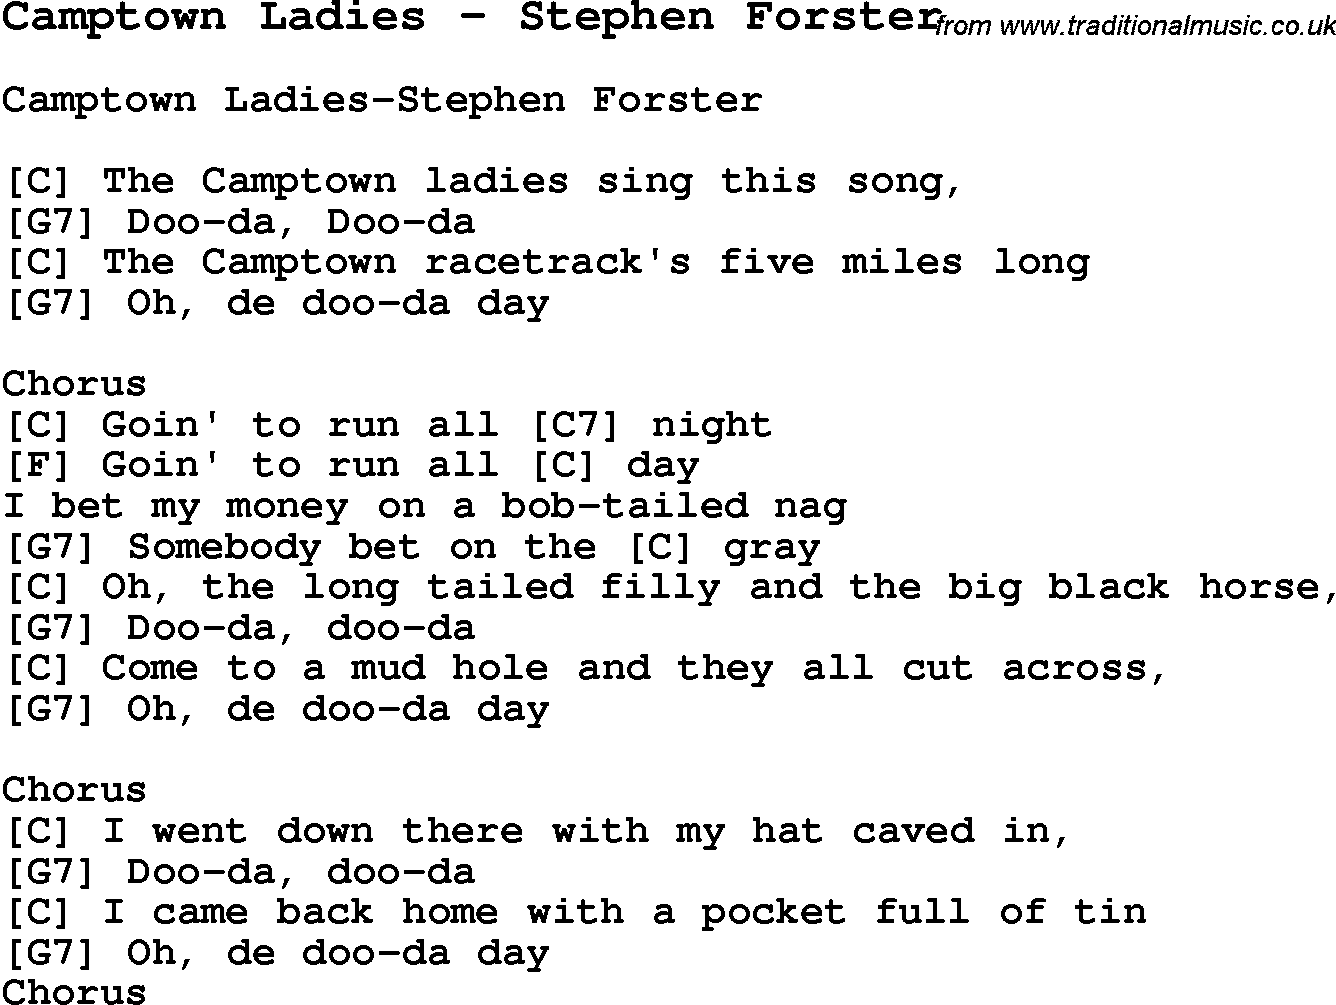 Song Camptown Ladies by Stephen Forster, with lyrics for vocal performance and accompaniment chords for Ukulele, Guitar Banjo etc.